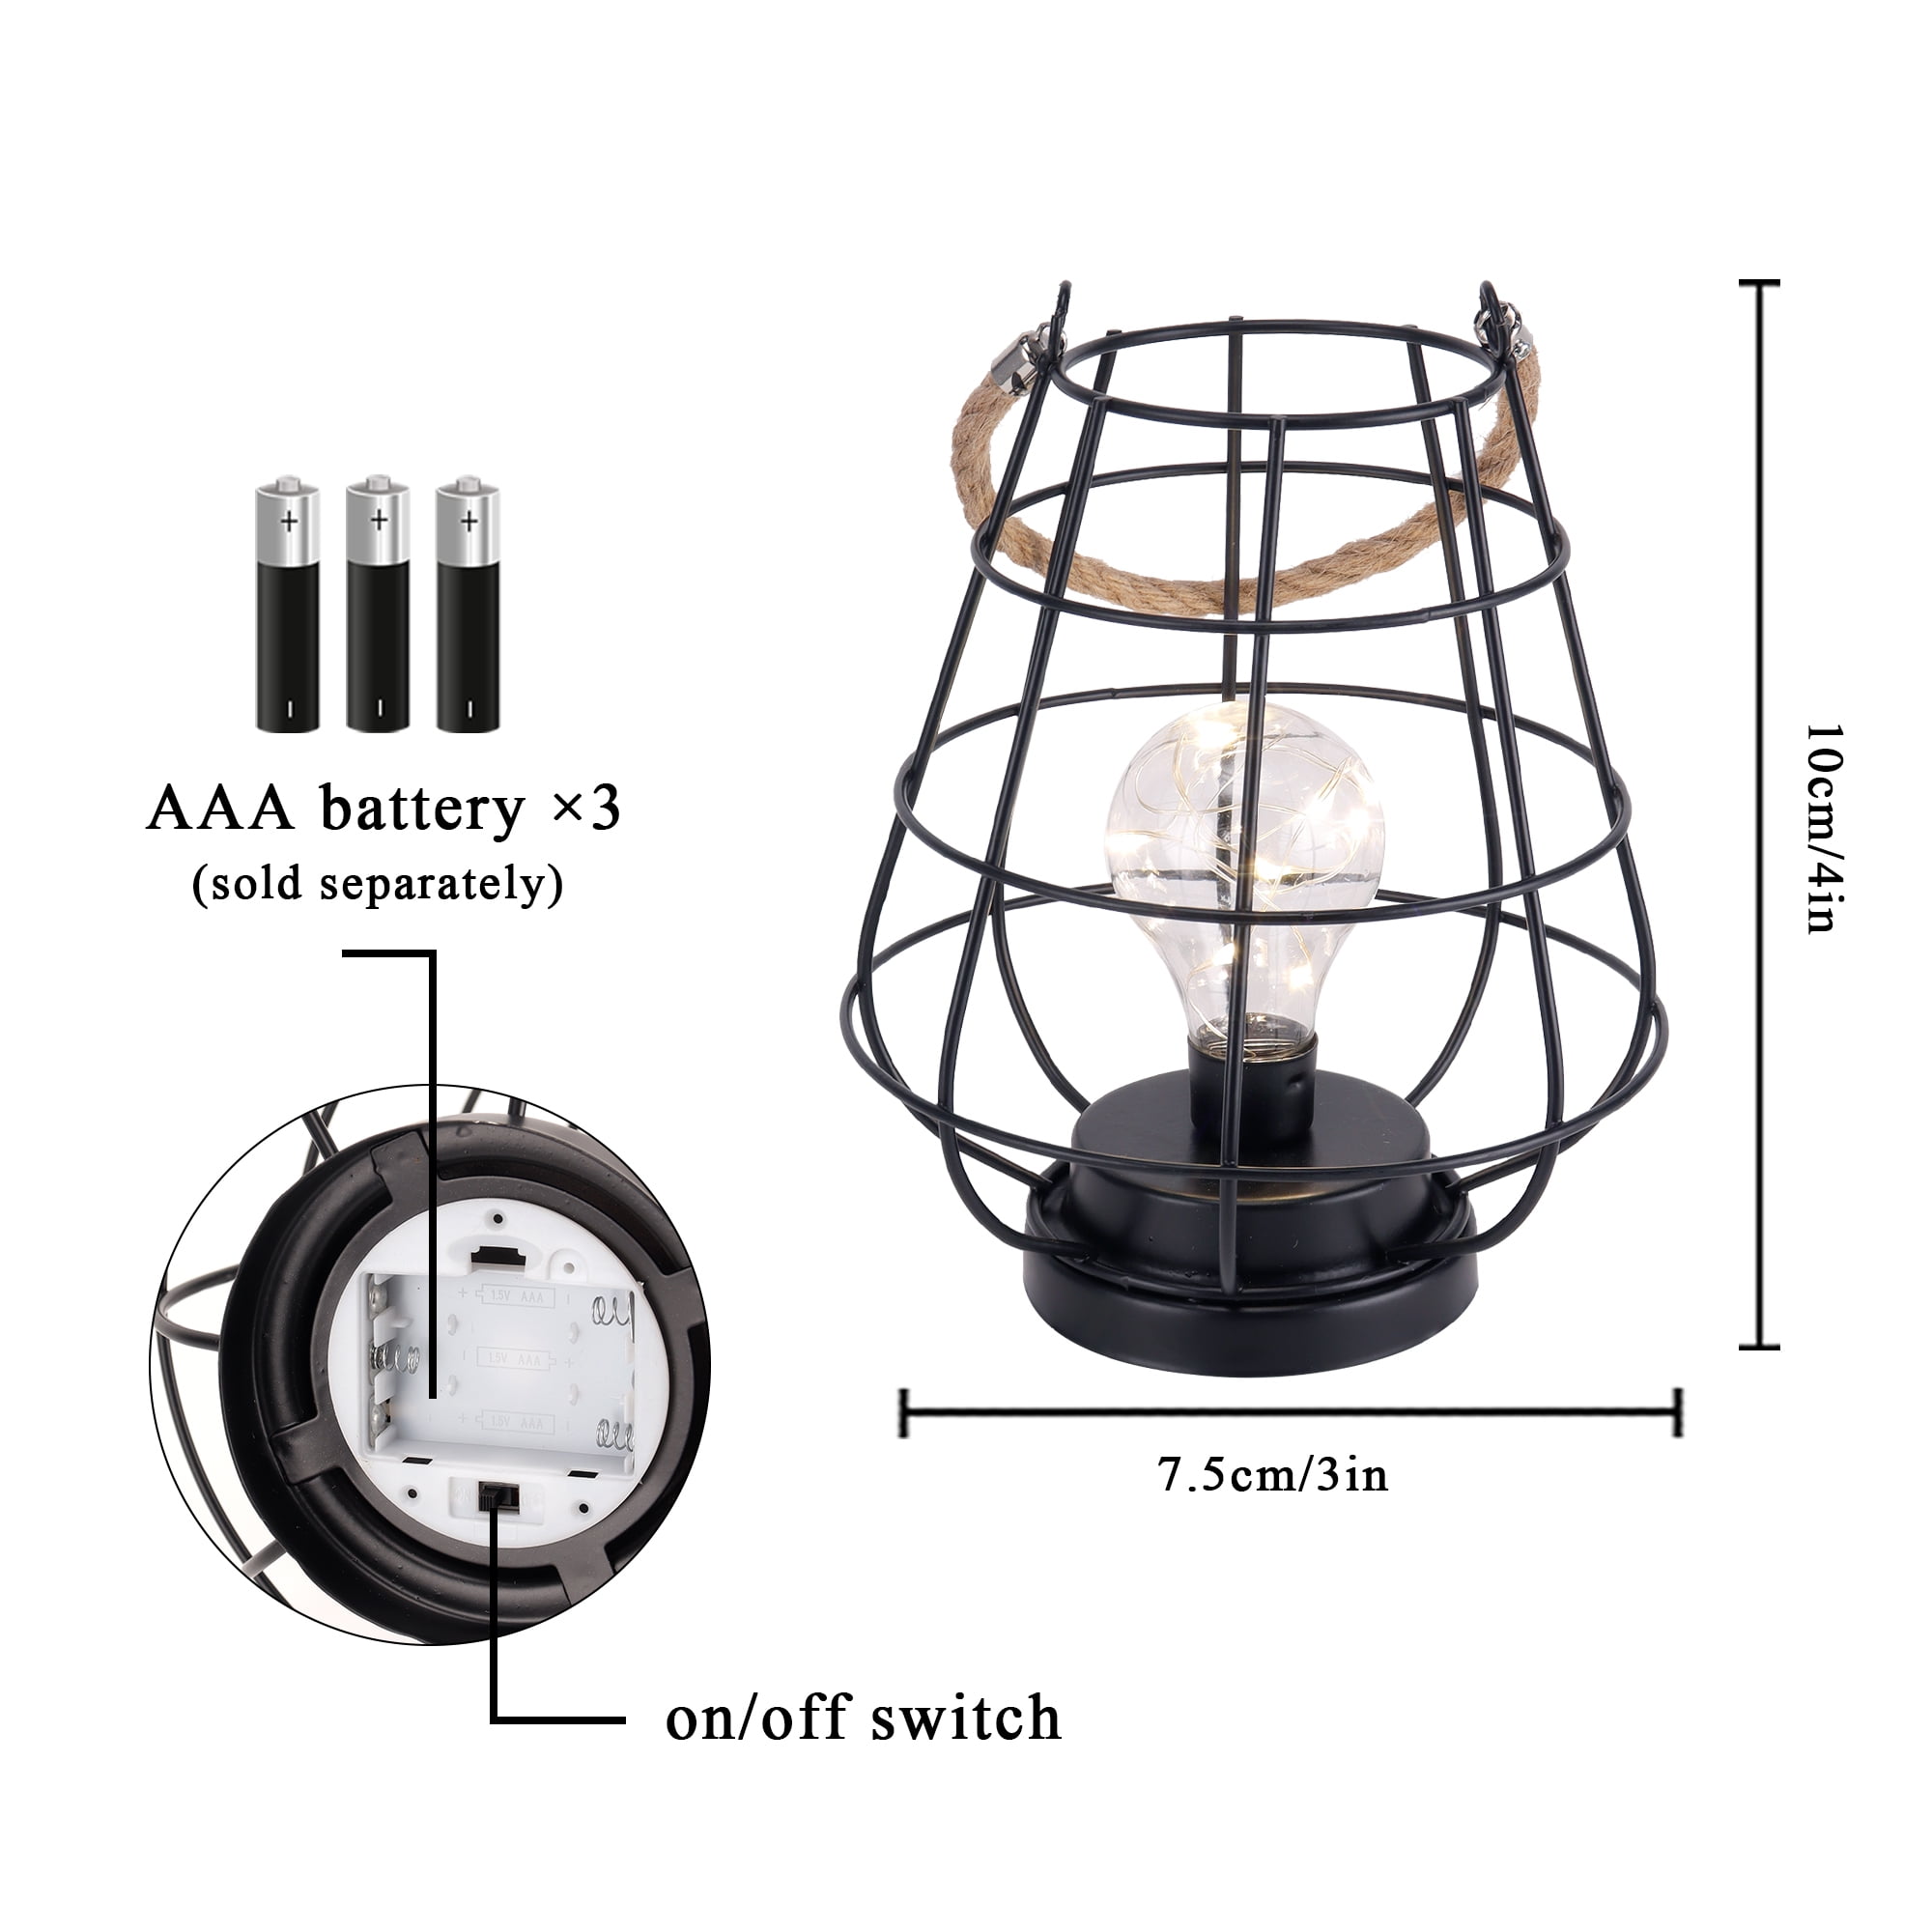 JHY Design Metal Cage LED Lantern Battery Powered,7.3 Tall Cordless Accent Light with 20pcs Fairy Lights.Great for Weddings, Parties, Patio, Events